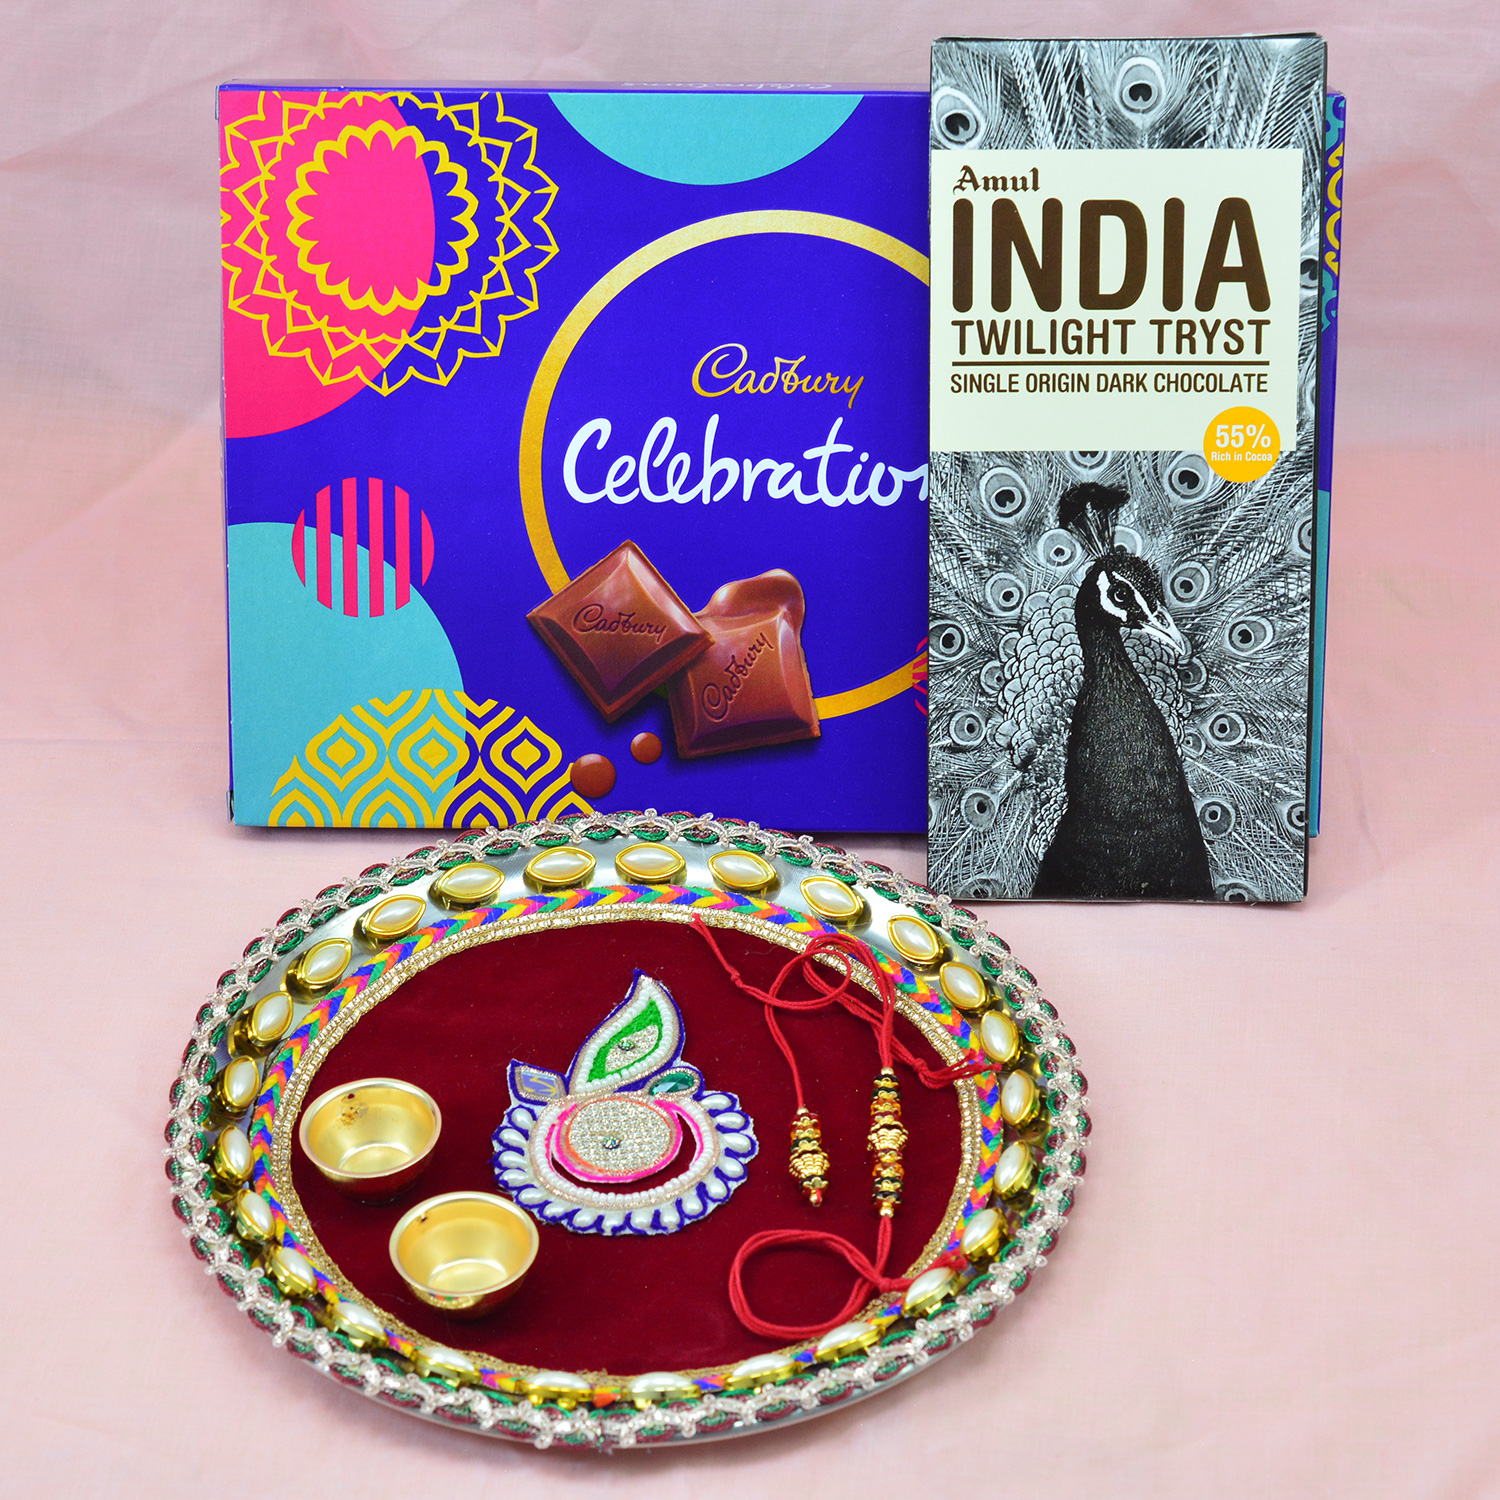 Cadbury and Amul Chocolate Pack in One Hamper with Rich Work Awesome Looking Rakhi Pooja Thali